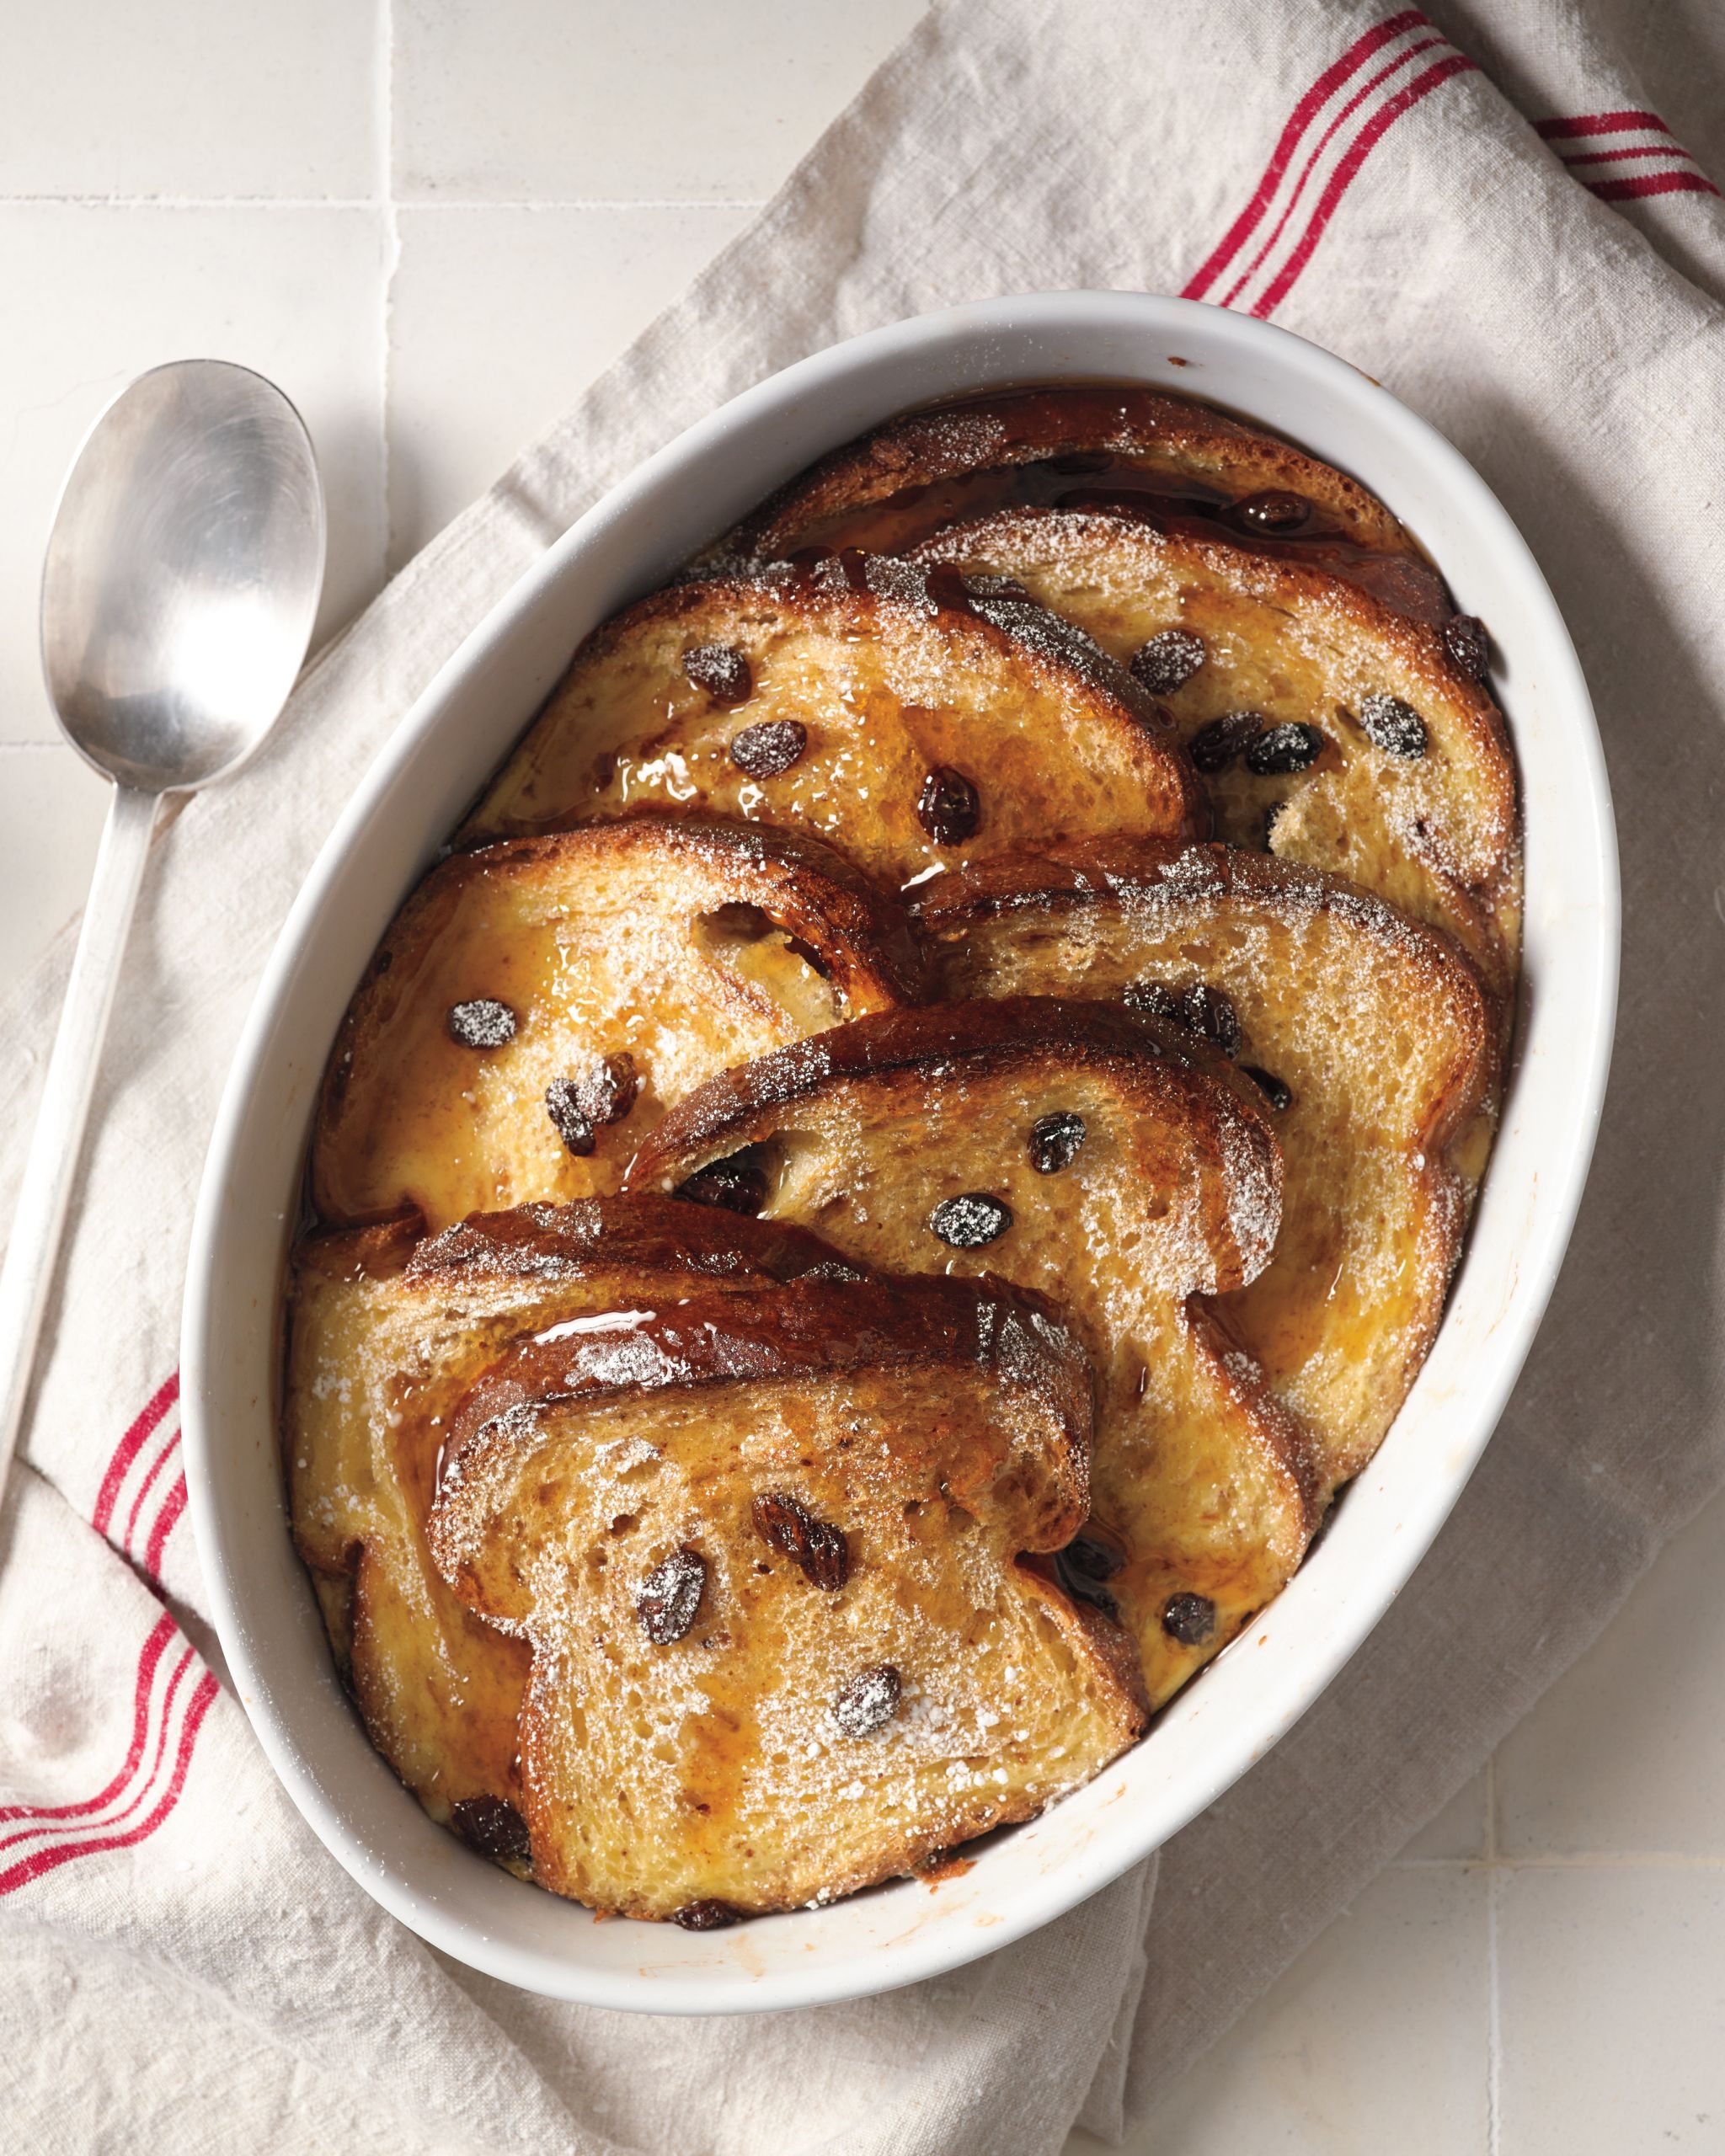 Martha Stewart Baked French Toast
 Baked French Toast Recipes for an Easy Make Ahead Brunch